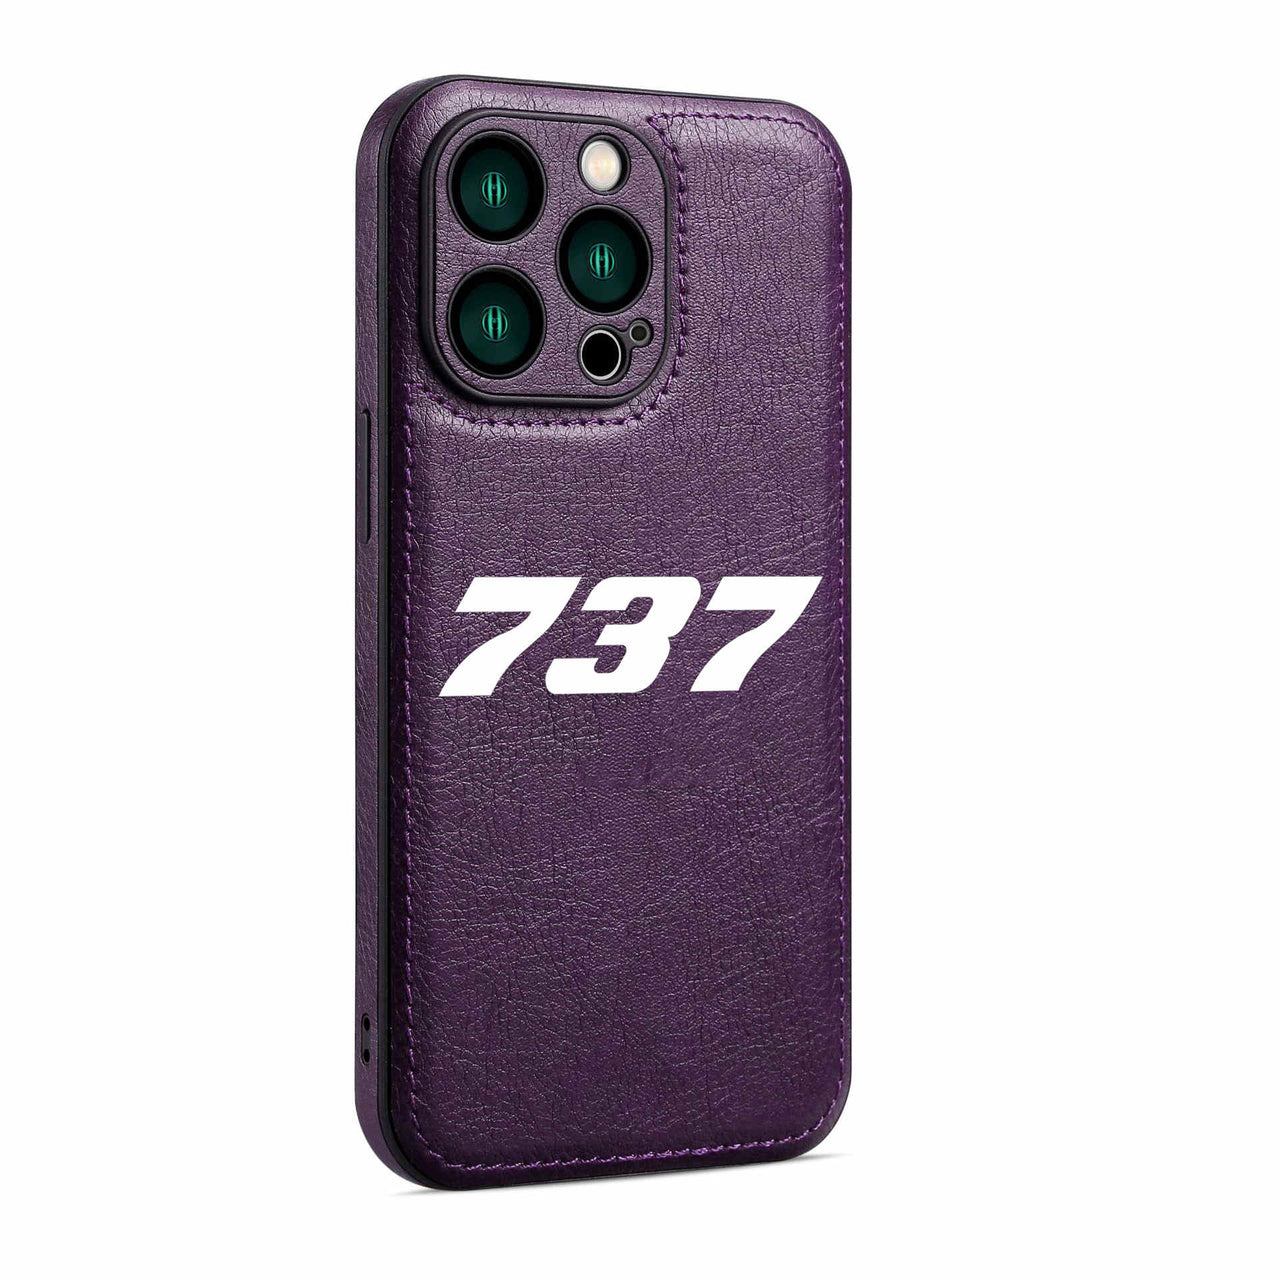 737 Flat Text Designed Leather iPhone Cases